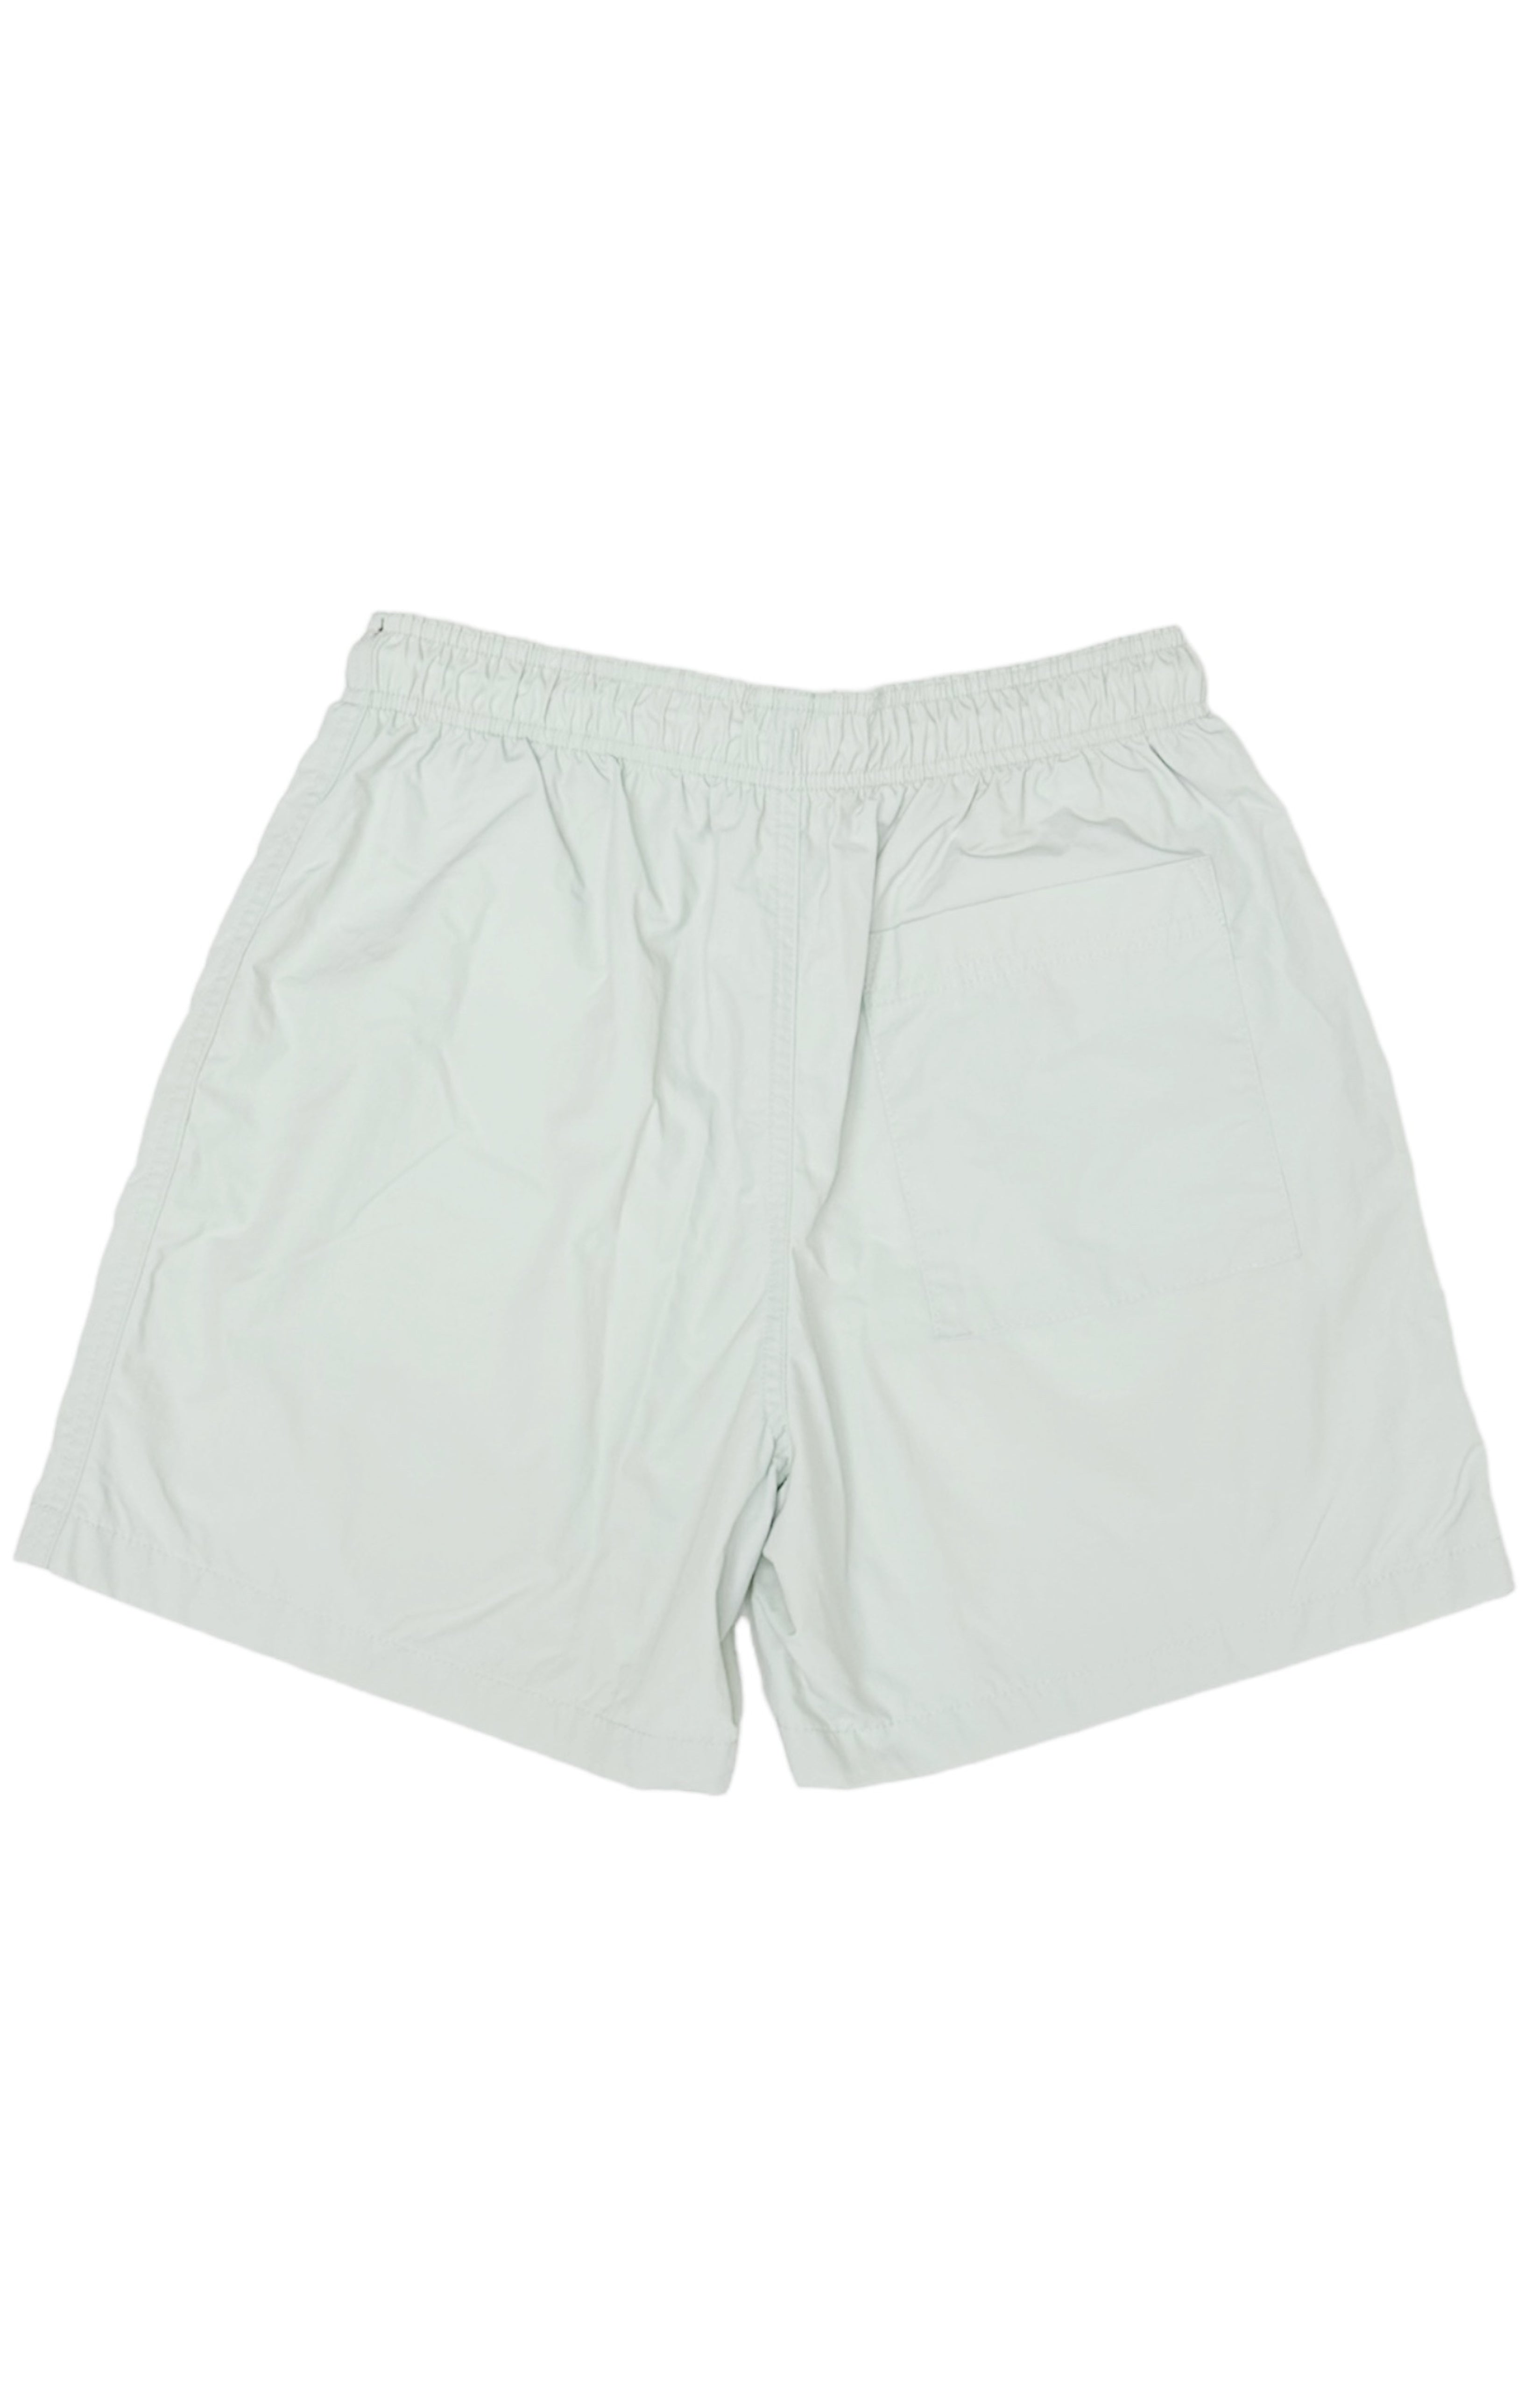 URBAN OUTFITTERS Swim Trunks Size: Men's S